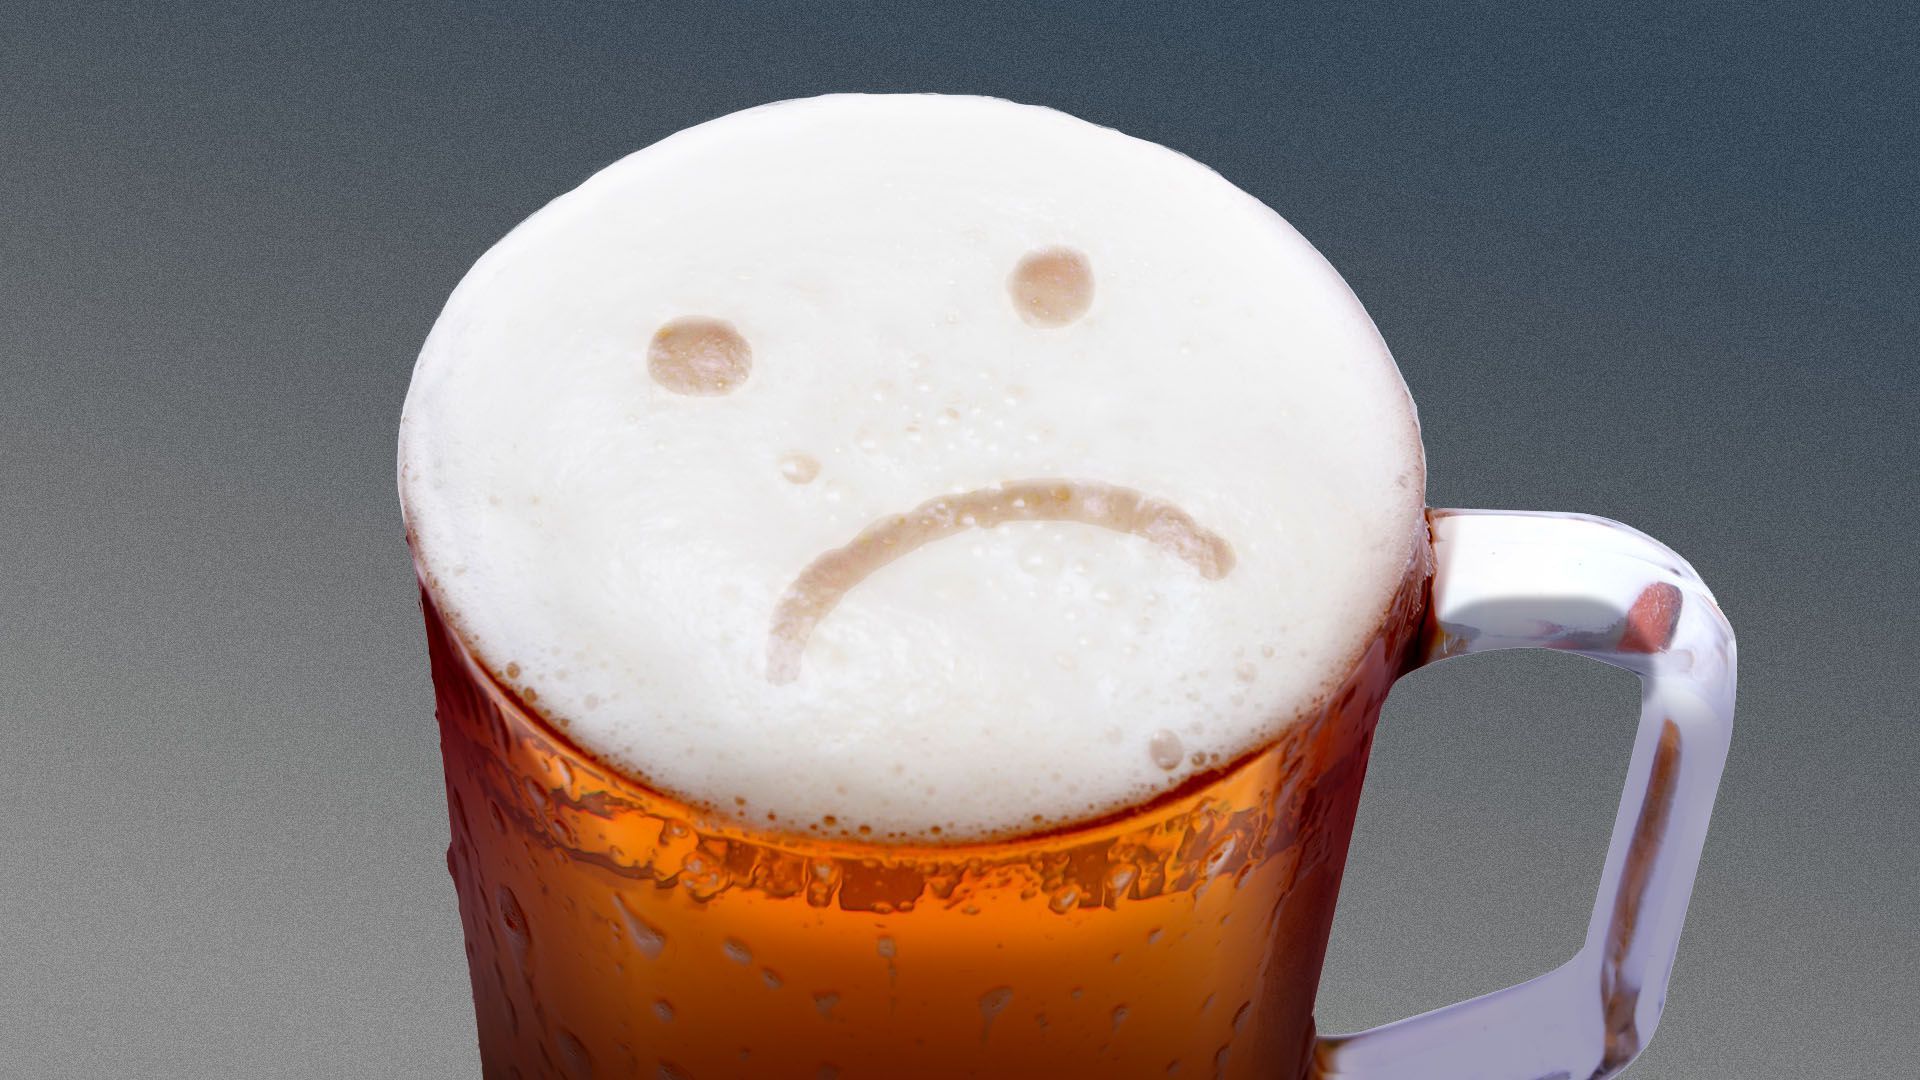 Beer with a sad face